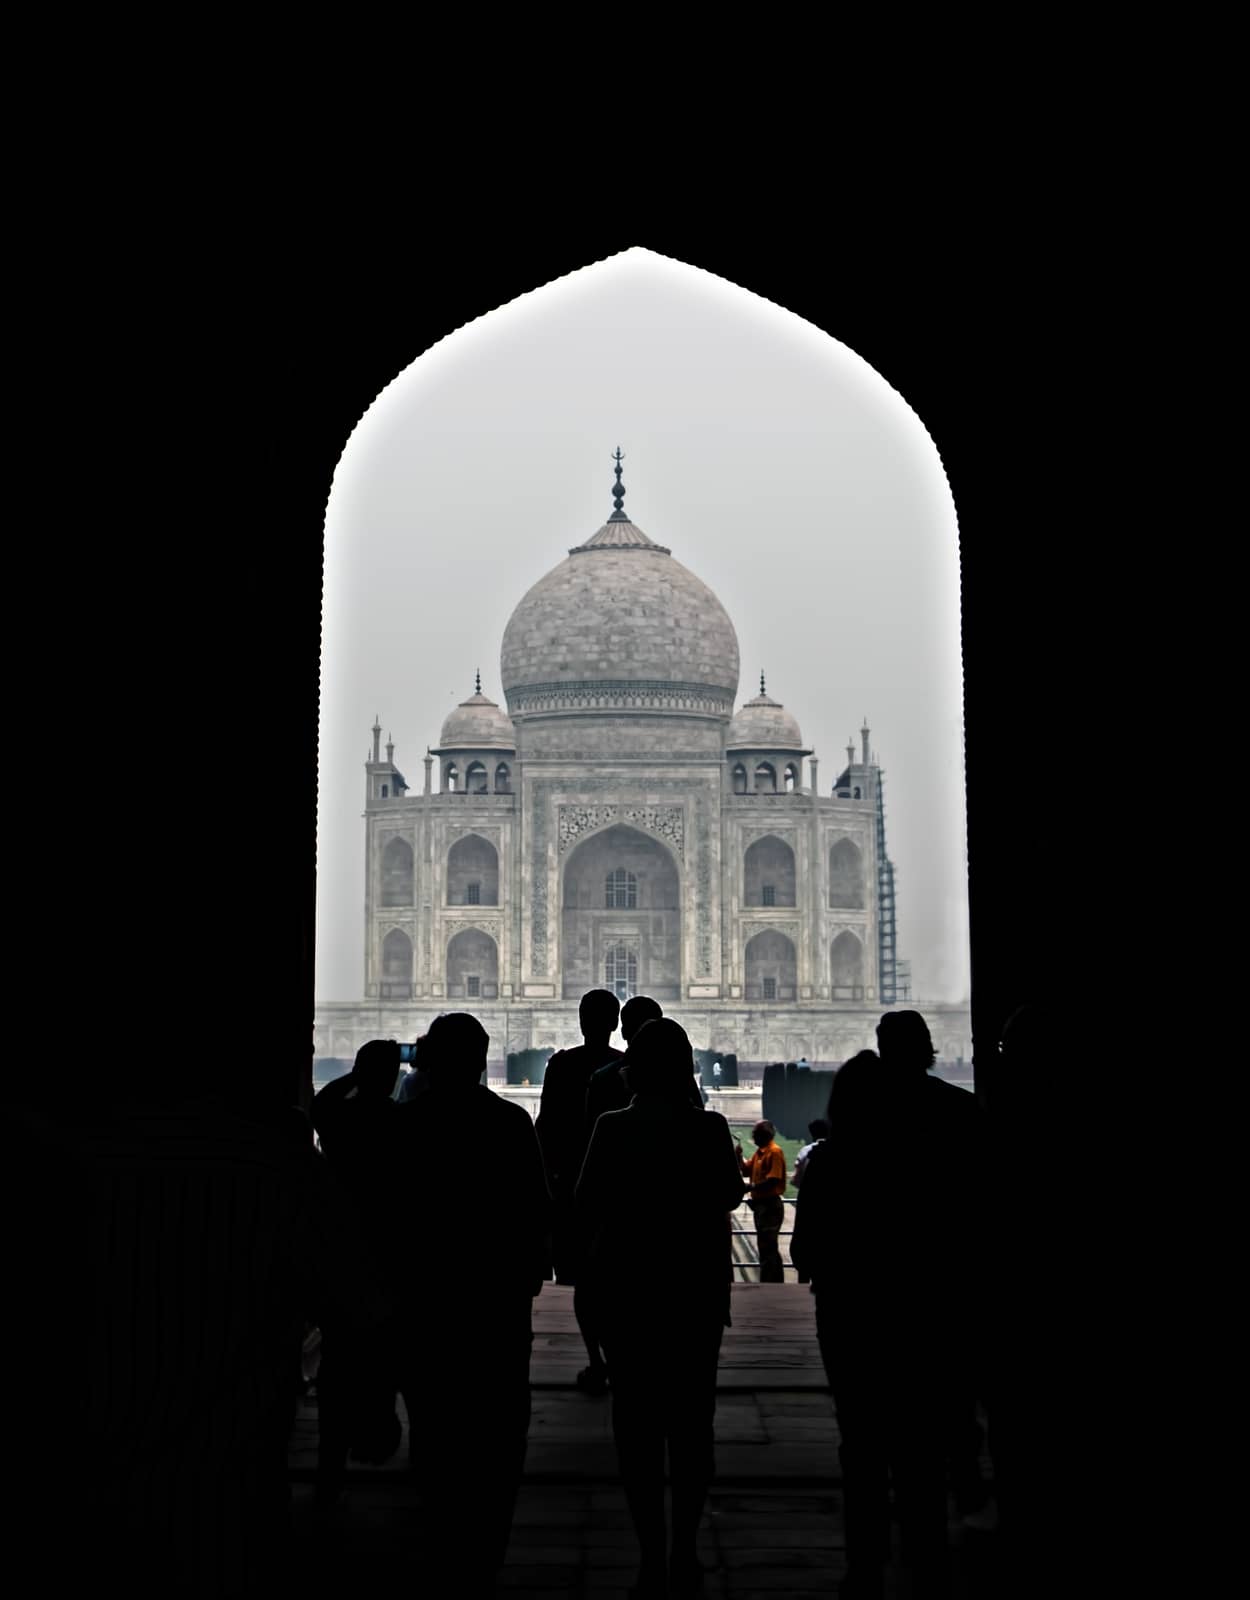 First glimpse of one of the seven wonders of the world-The Taj Mahal is through this gate. by lalam